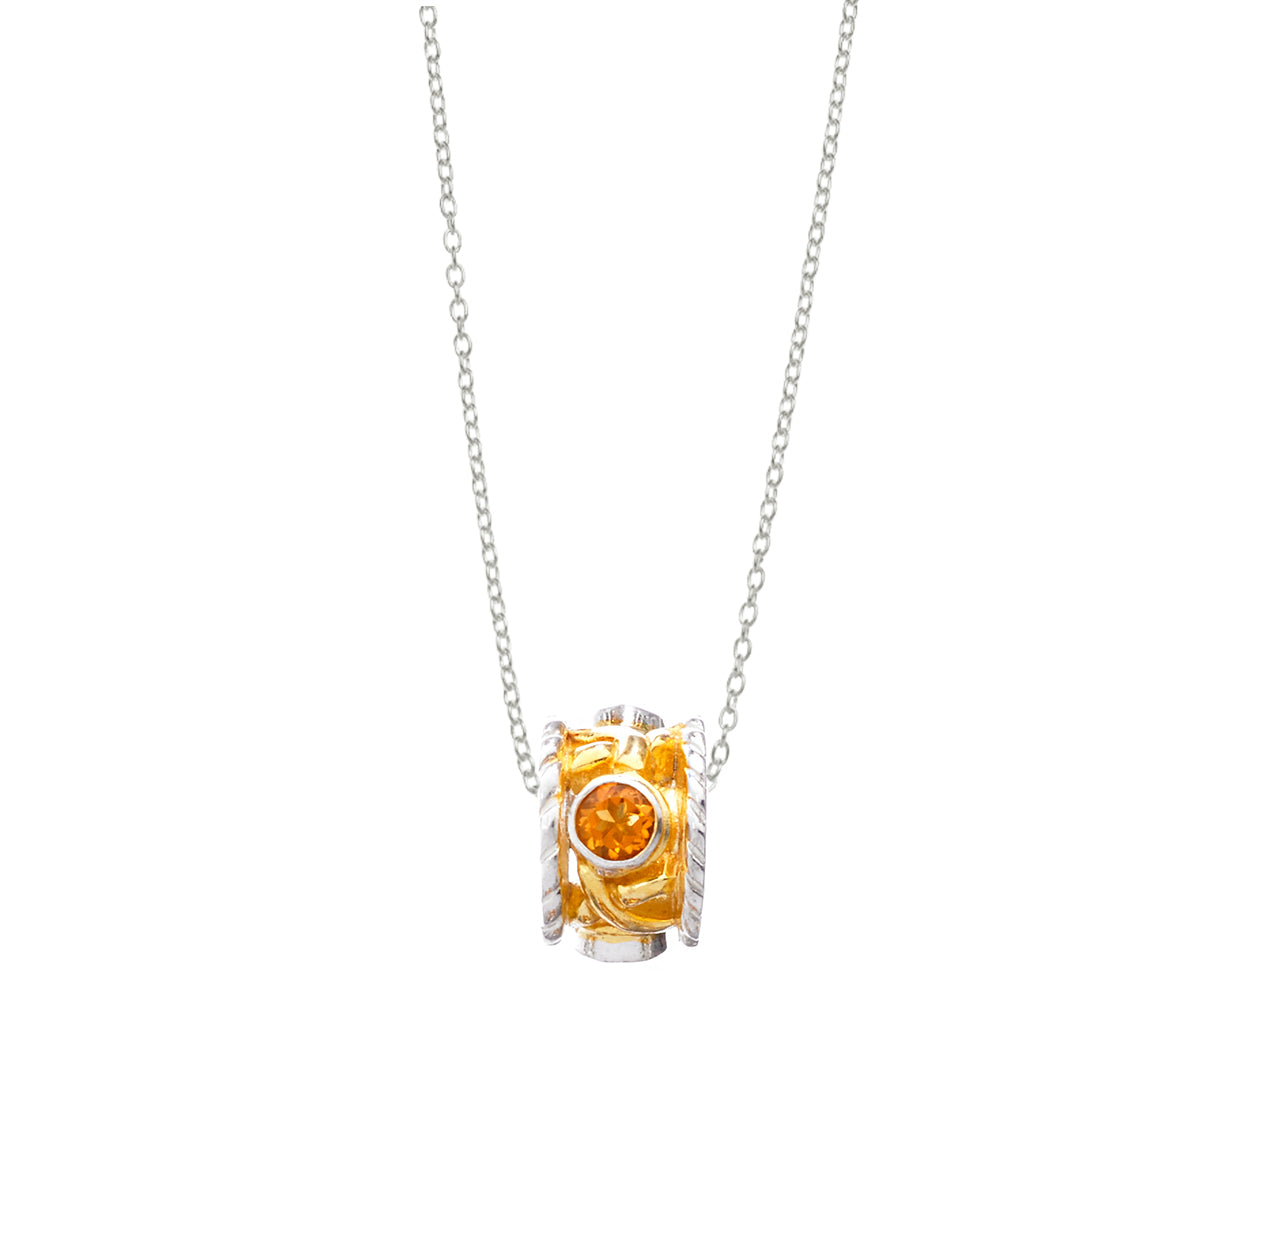 November Citrine Sterling Silver with 14k Gold Vermeil Bead Necklace